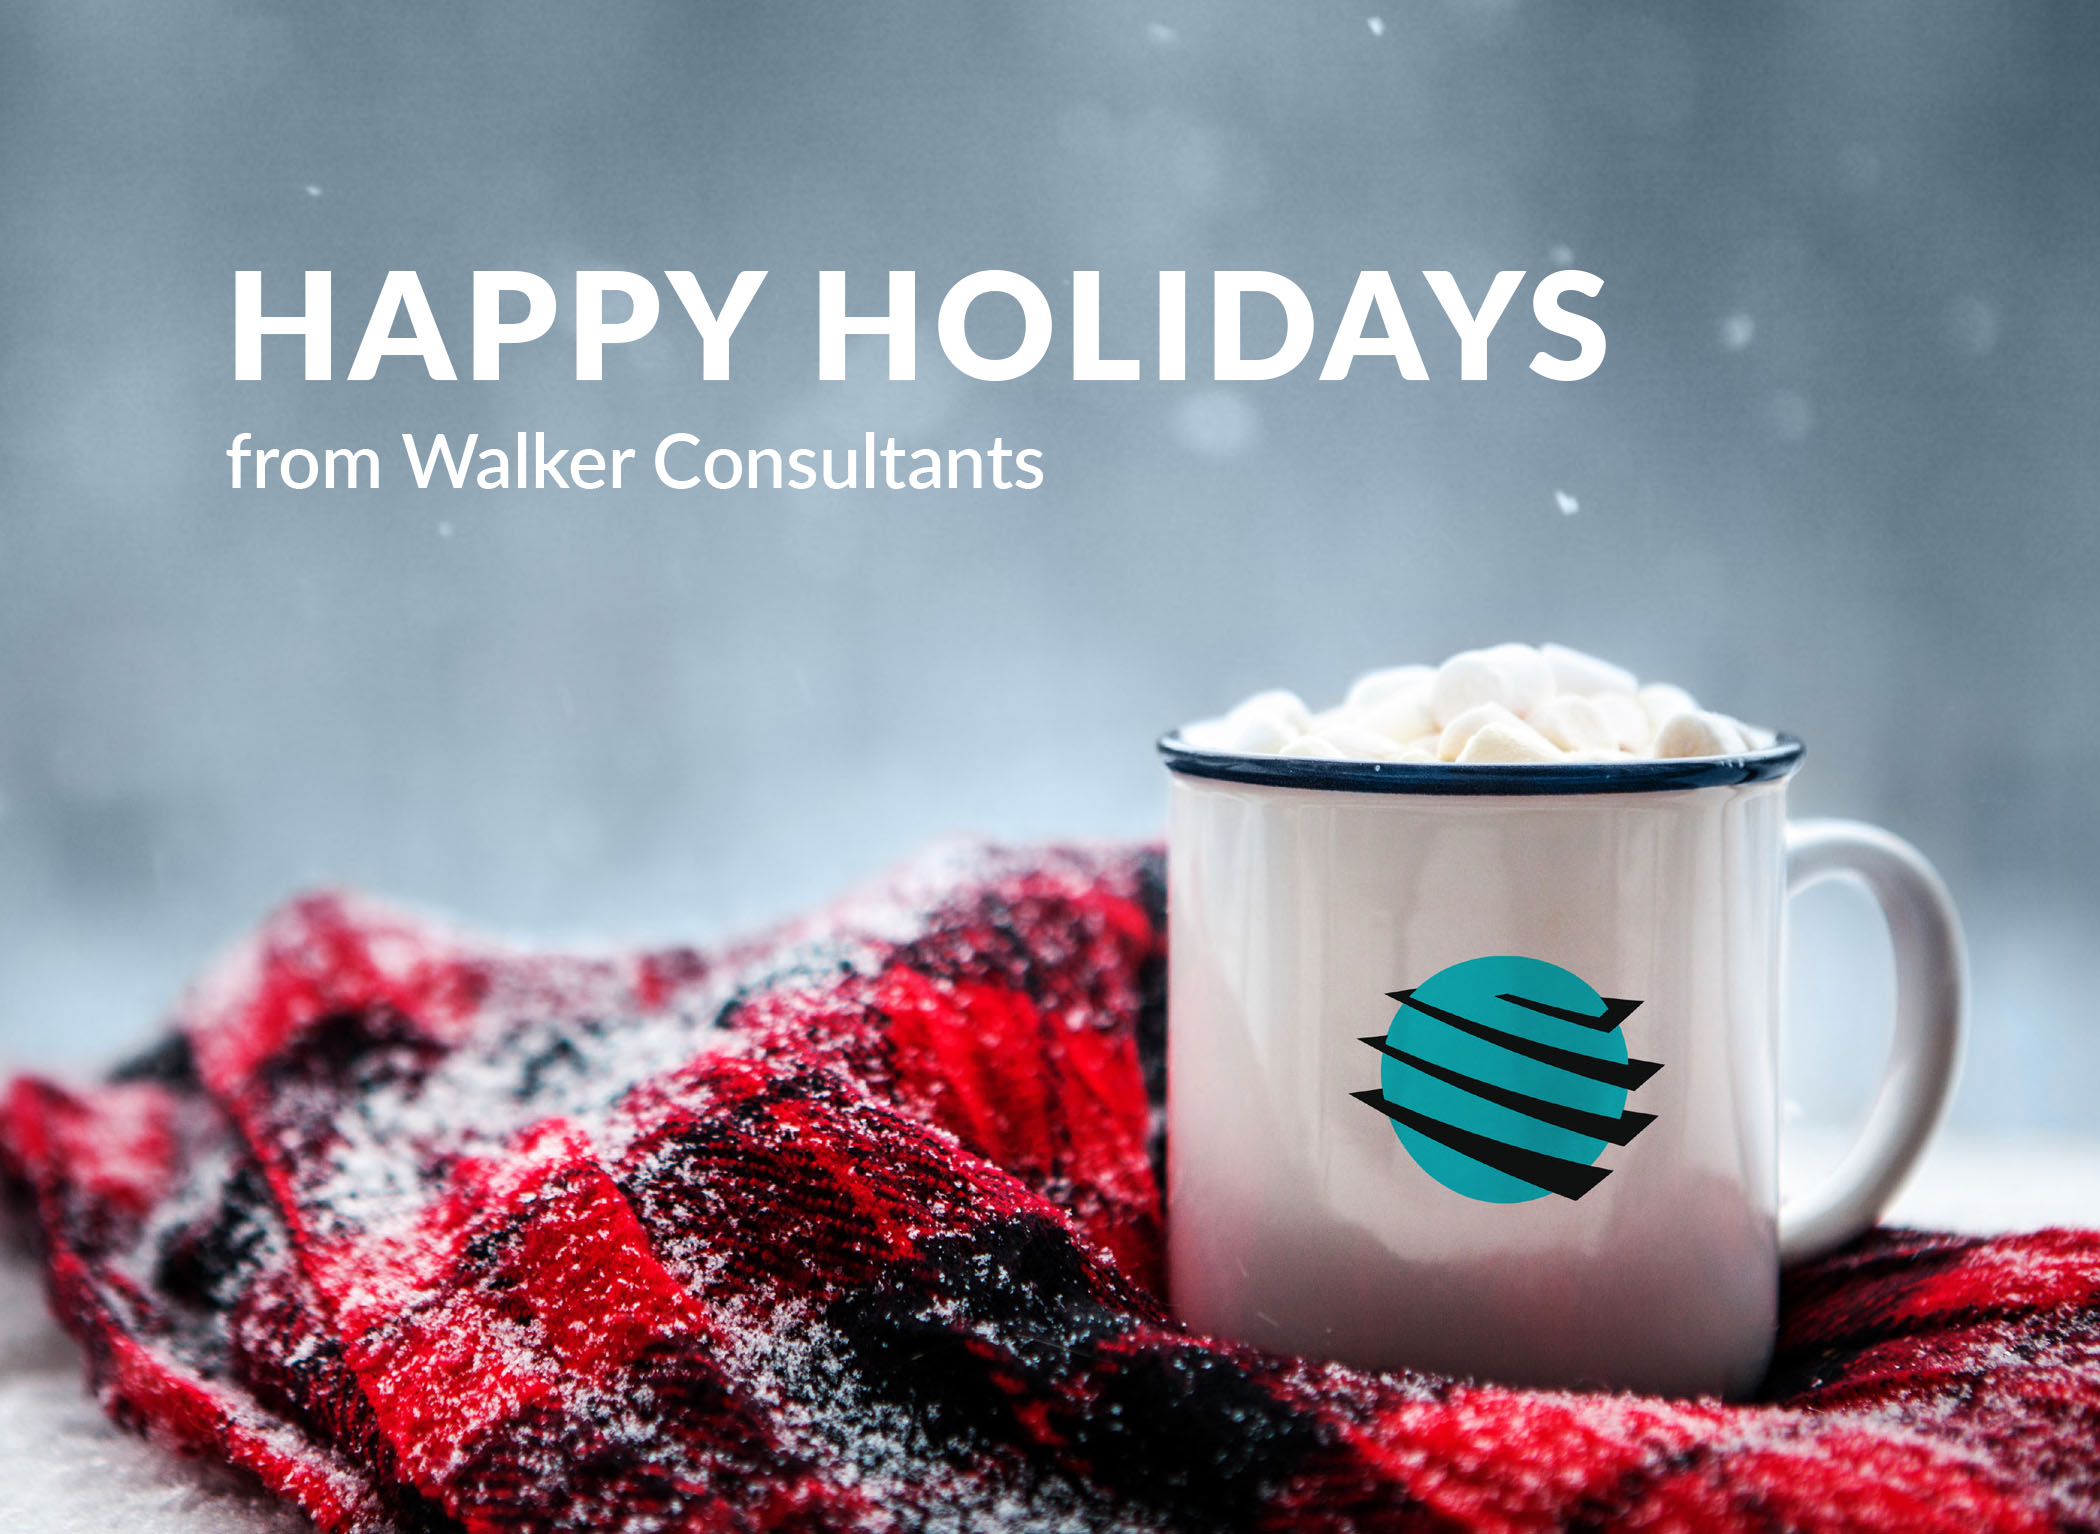 Happy Holidays from Walker Consultants